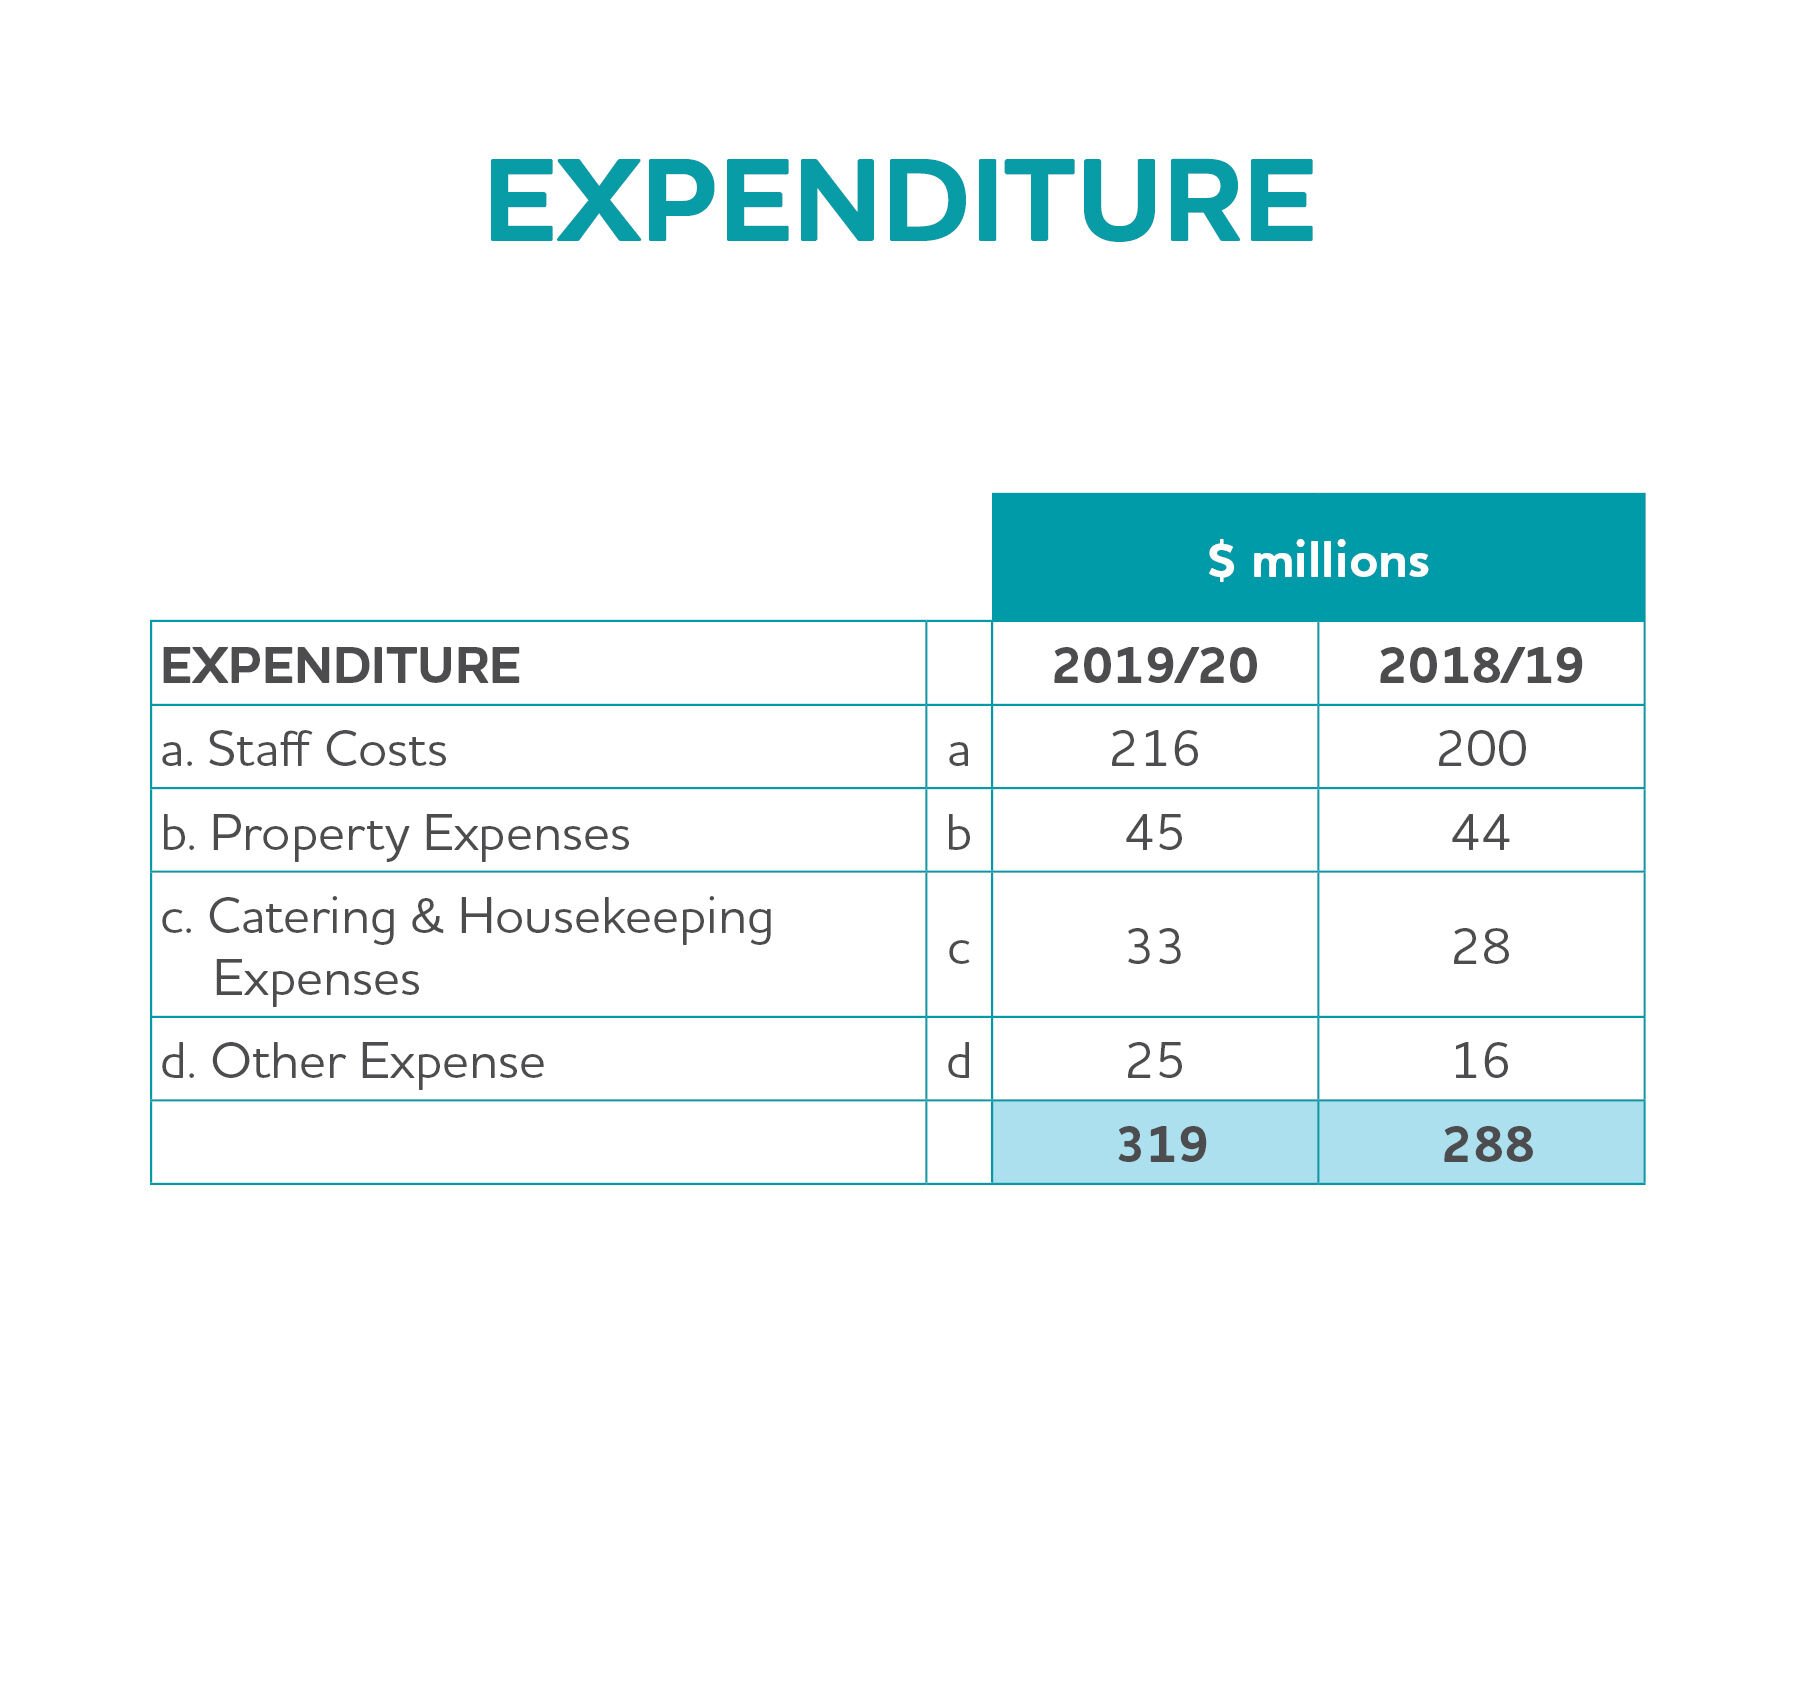 Expenditure table